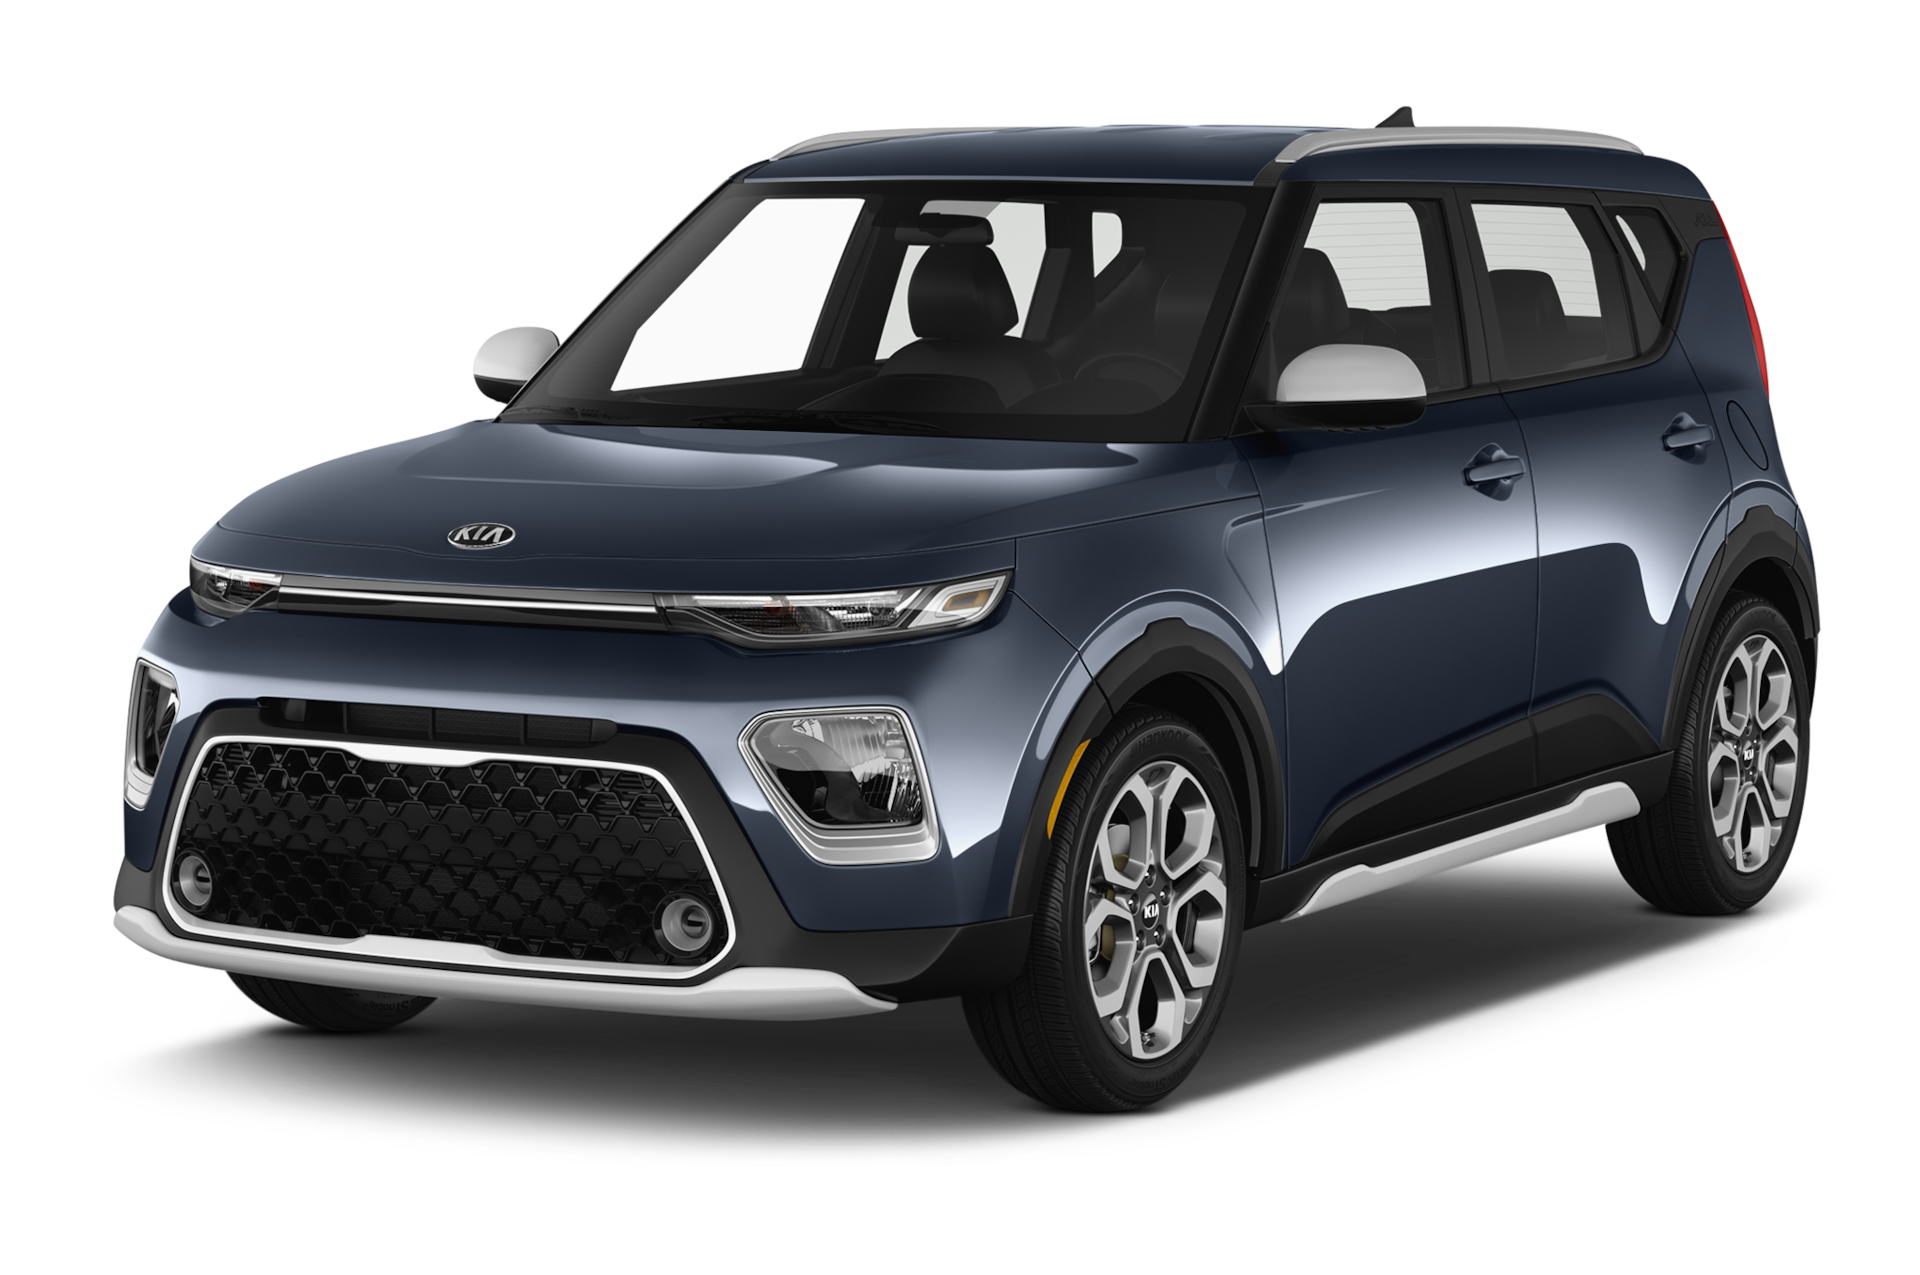 2020 Kia Soul Prices, Reviews, and Photos - MotorTrend